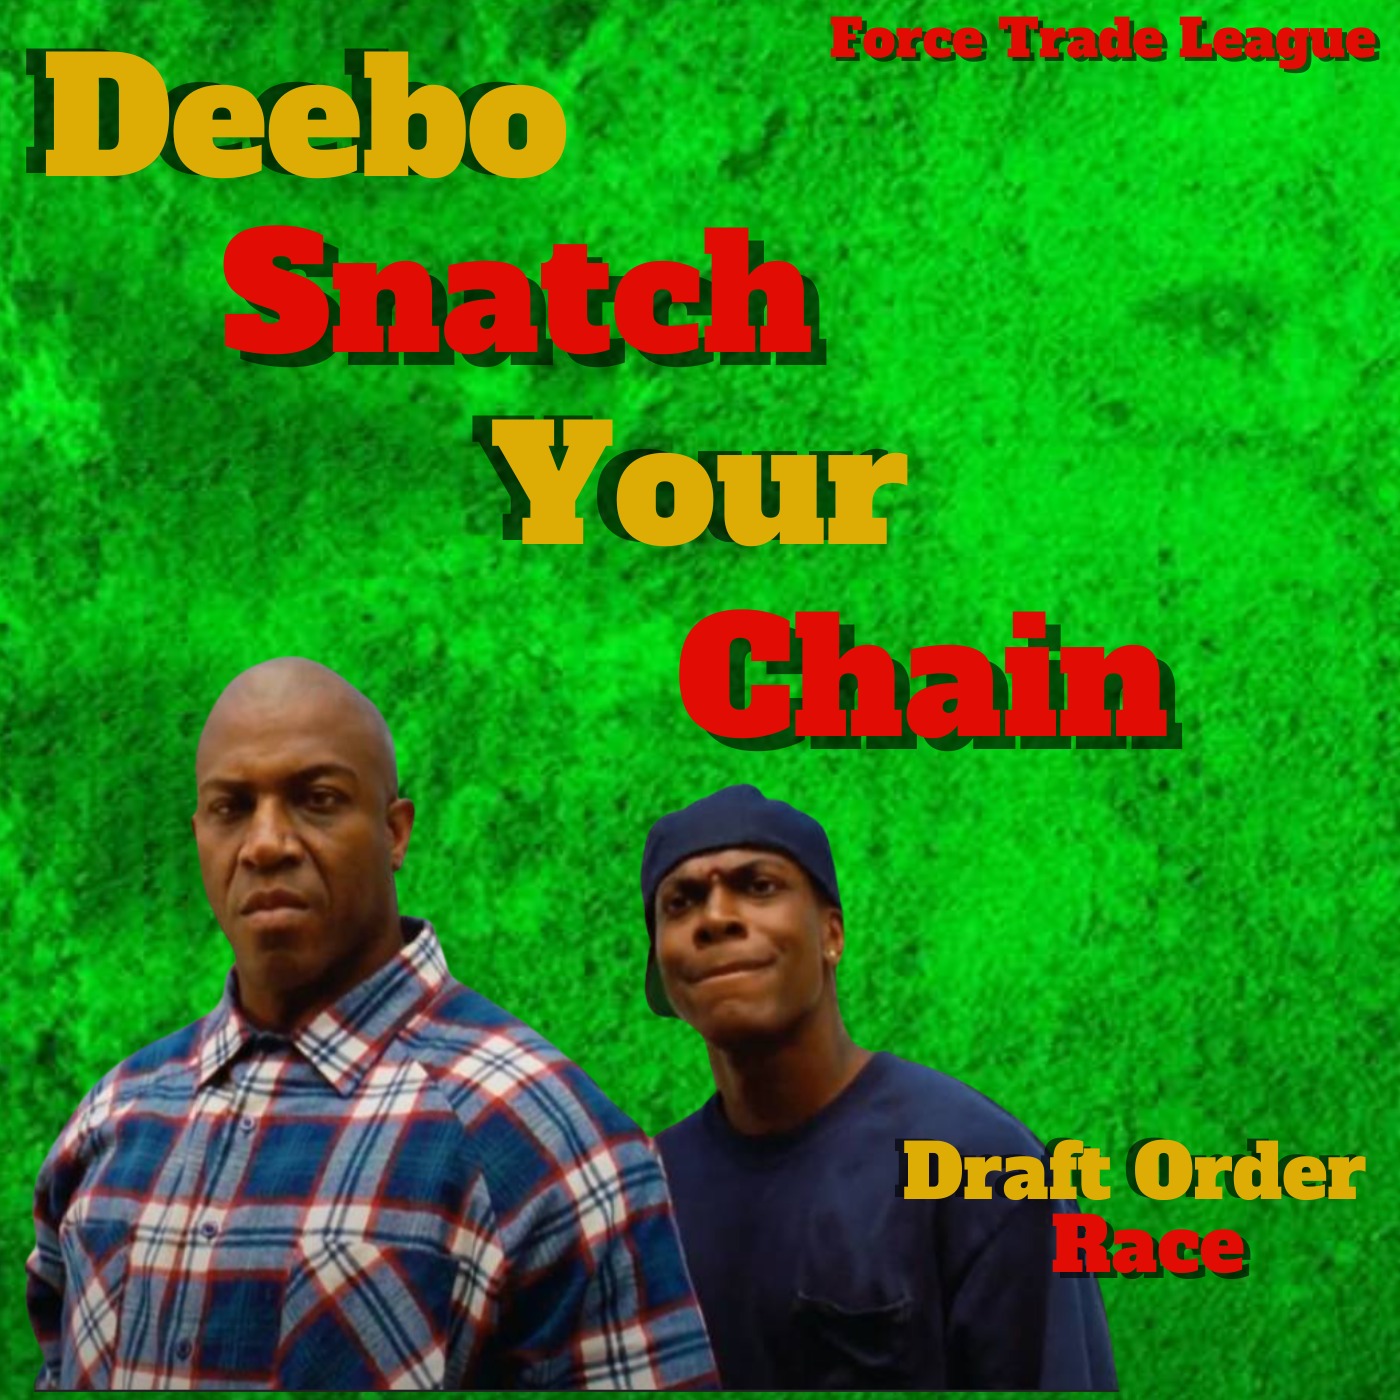 Deebo Snatch Your Chain League Draft Order Race, Force Trade League Image